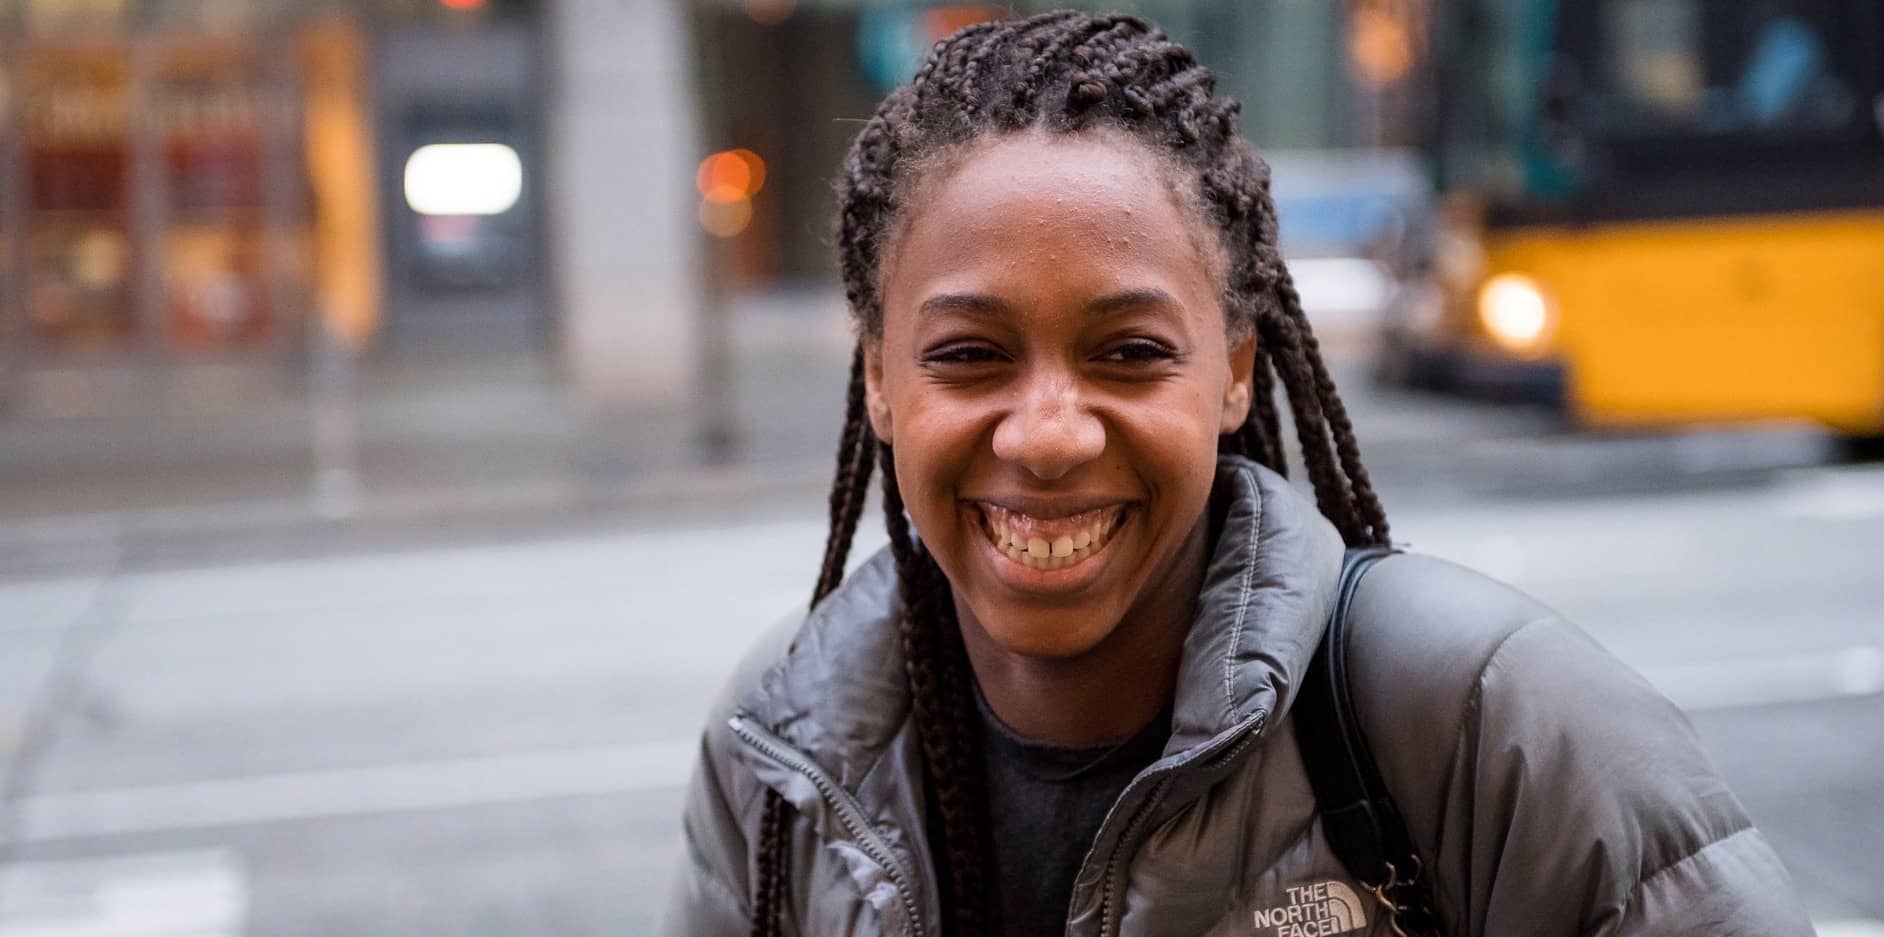 Photo of November, a smiling young woman Black woman standing on the sidewalk.